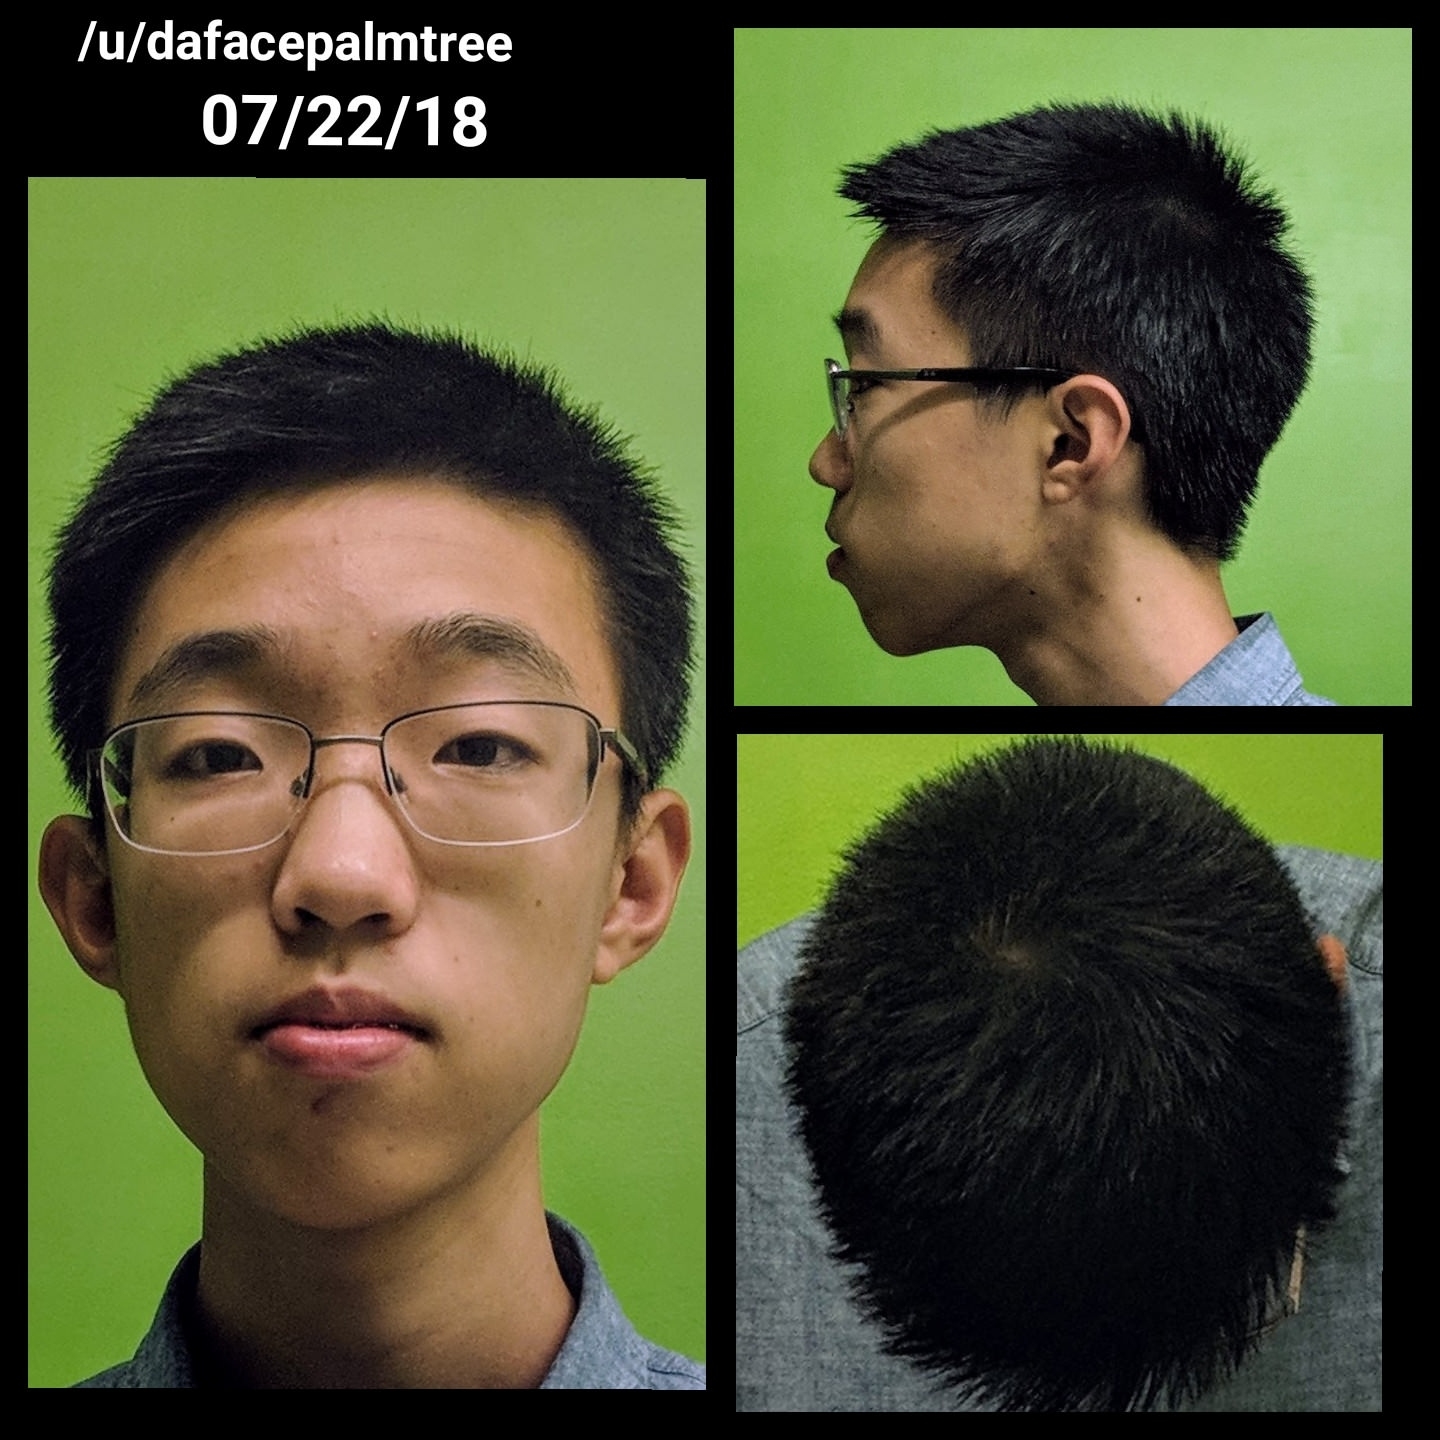 Hairstyle Advice For Straight, Thin Asian Hair Profile? : Malehairadvice for Amazing Hairstyles For Thin Fine Asian Hair